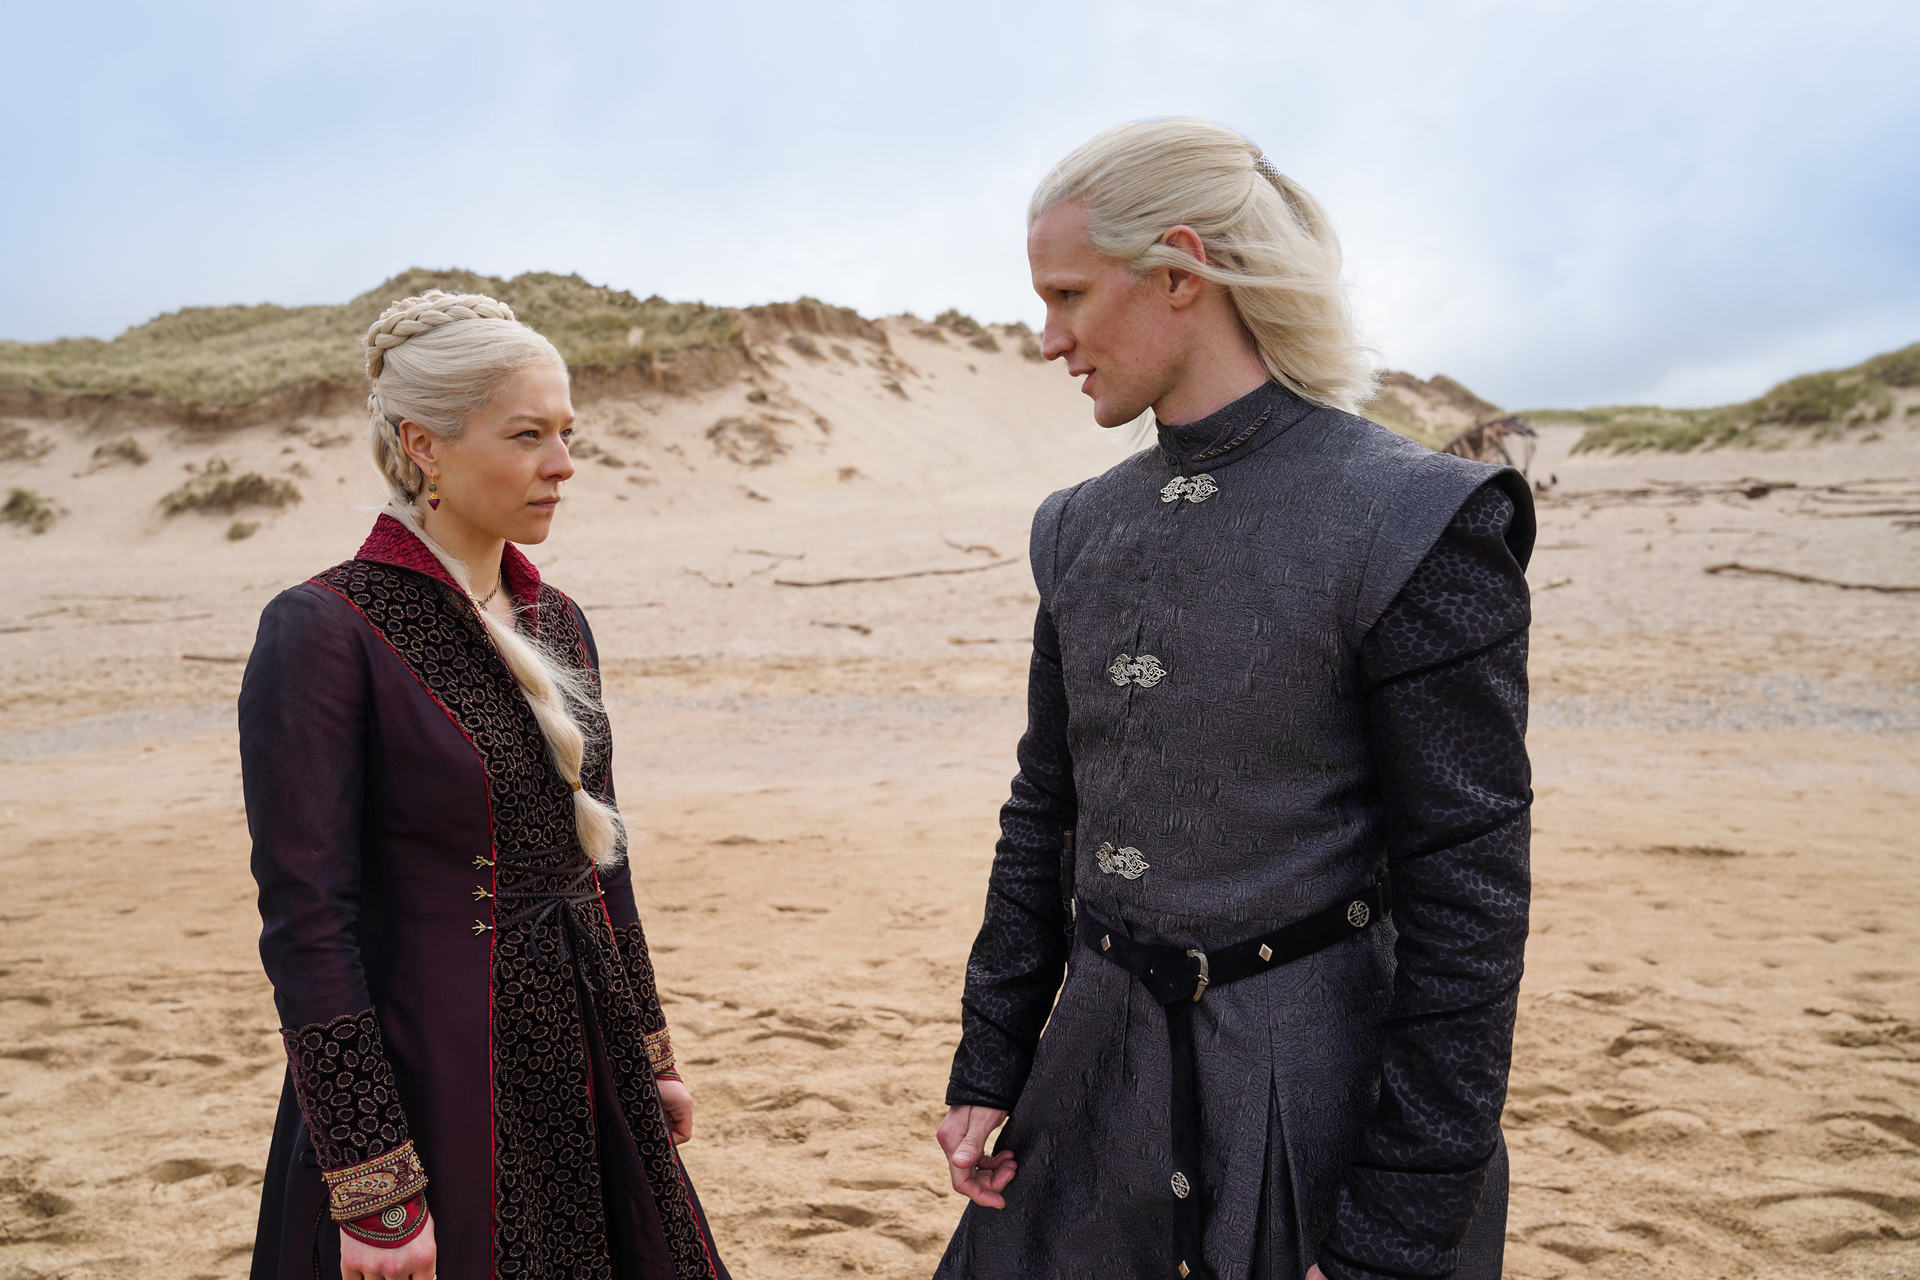 PHOTO: Emma D'Arcy as "Princess Rhaenyra Targaryen" and Matt Smith as "Prince Daemon Targaryen" star in HBO's "House of the Dragon." The ten-episode HBO Original drama debuts Aug. 21, 2022 on HBO and will be available to stream on HBO Max.